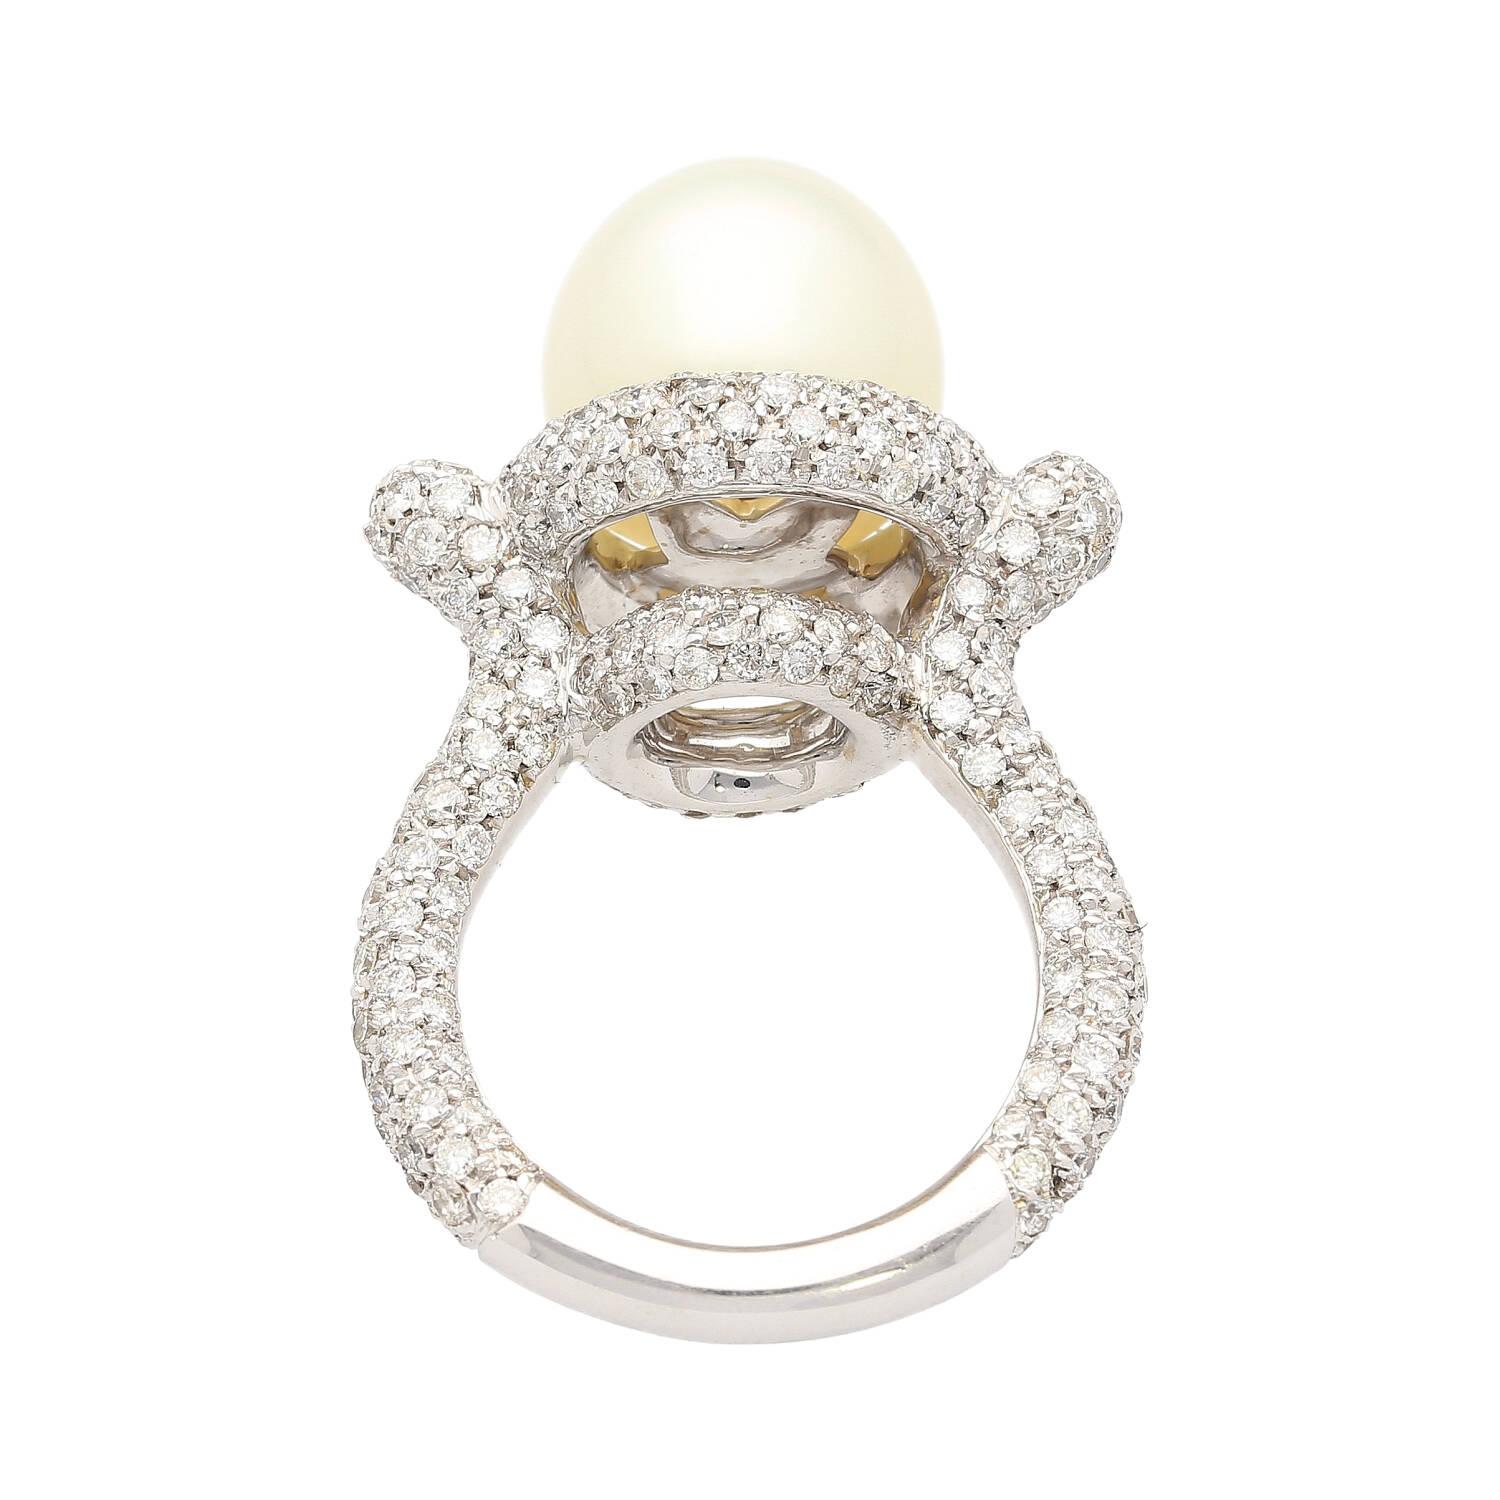 12.3mm cultured Southsea white pearl and diamond pave set ring. Set in 18k white gold. The pearl is clean, lustrous, and very symmetrical. Adorned with 3.44 carats in natural diamonds and beautifully pointed edges above the shank.  

Details: 
-